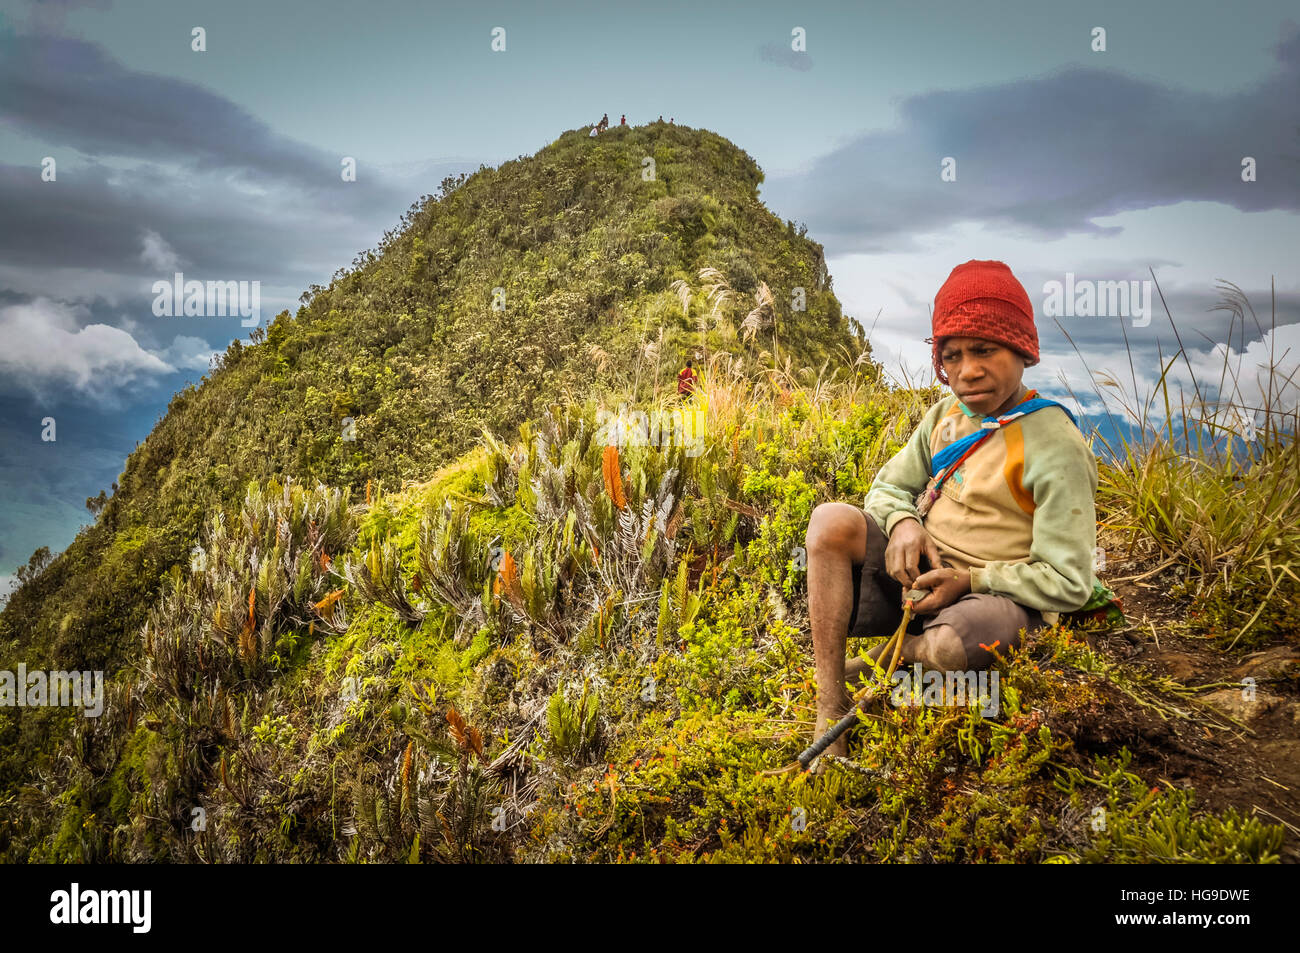 Sara village, Mt. Michael, Papua New Guinea - July 2015: Young native boy with red cap sits on ground near top of mountain and looks sadly down in Sar Stock Photo